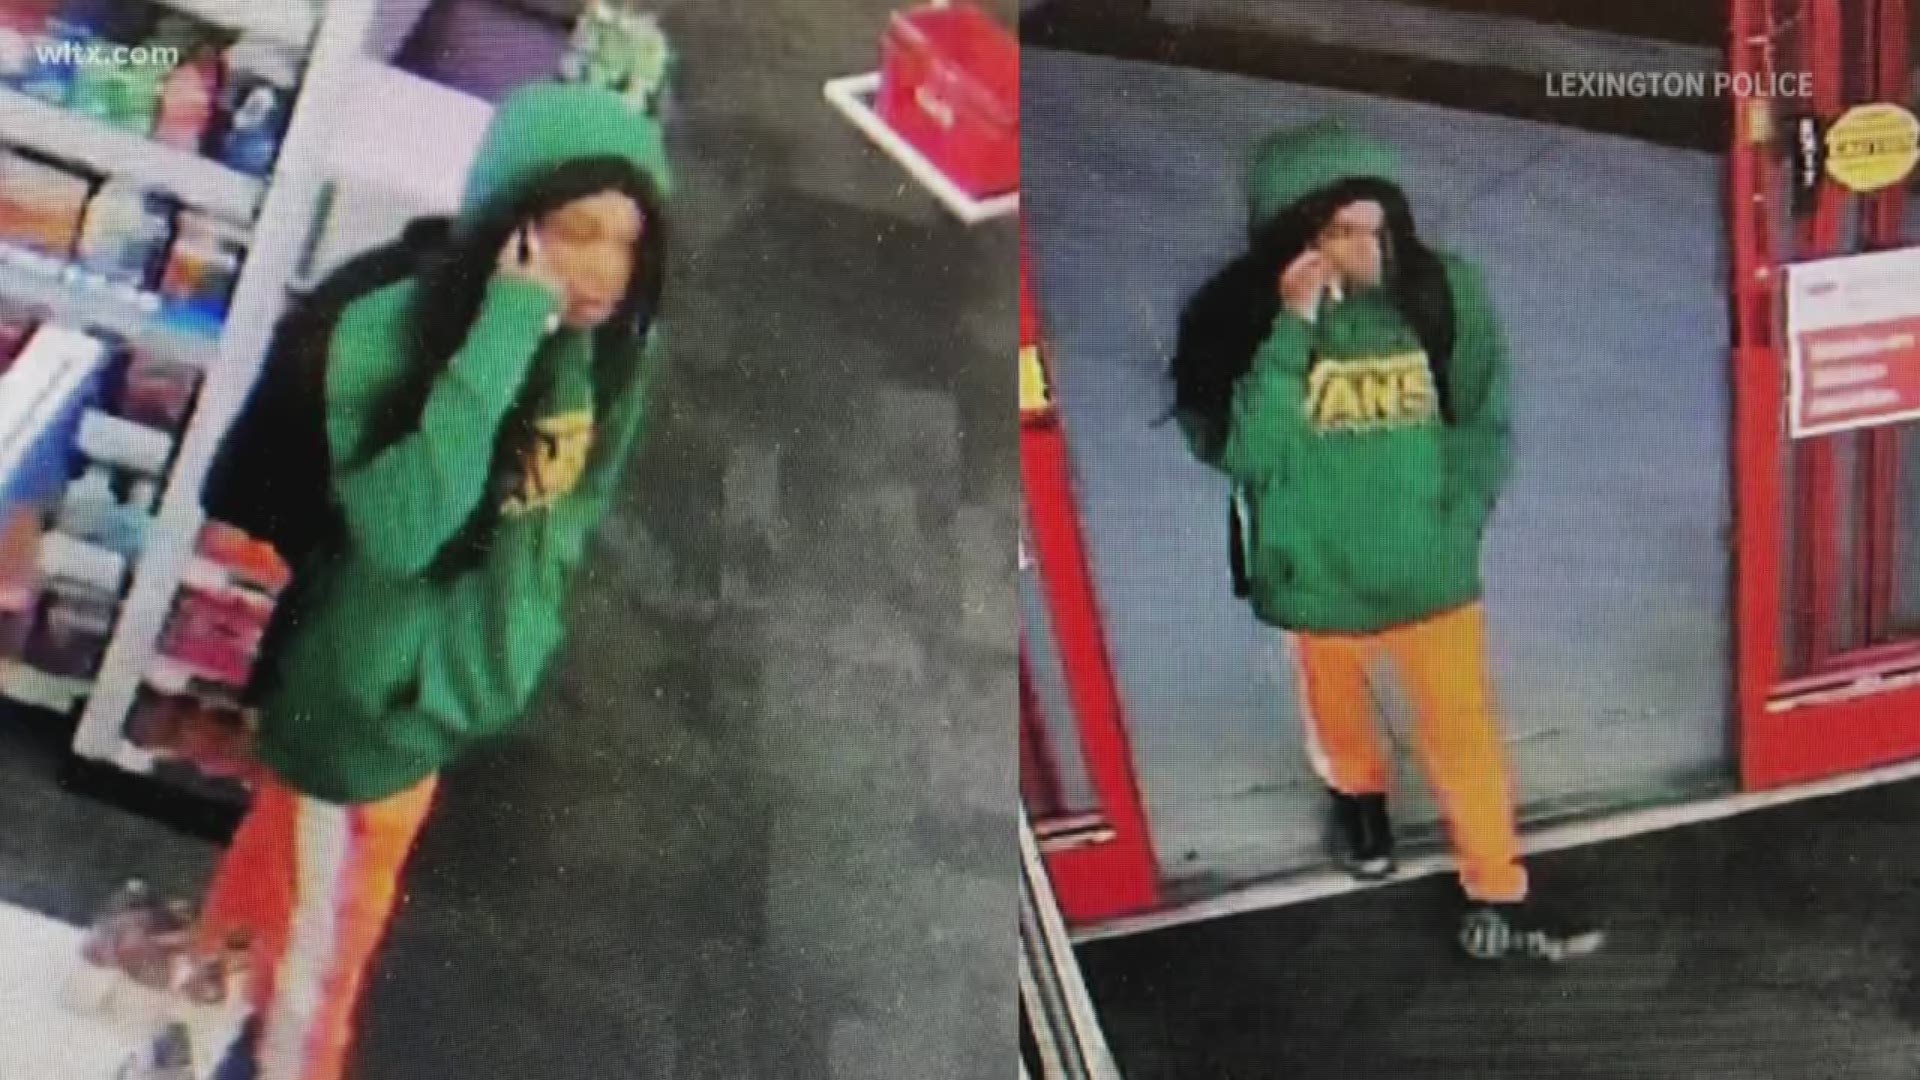 Lexington Police are looking for two suspects involved in an armed robbery at a CVS on Sunset Boulevard.